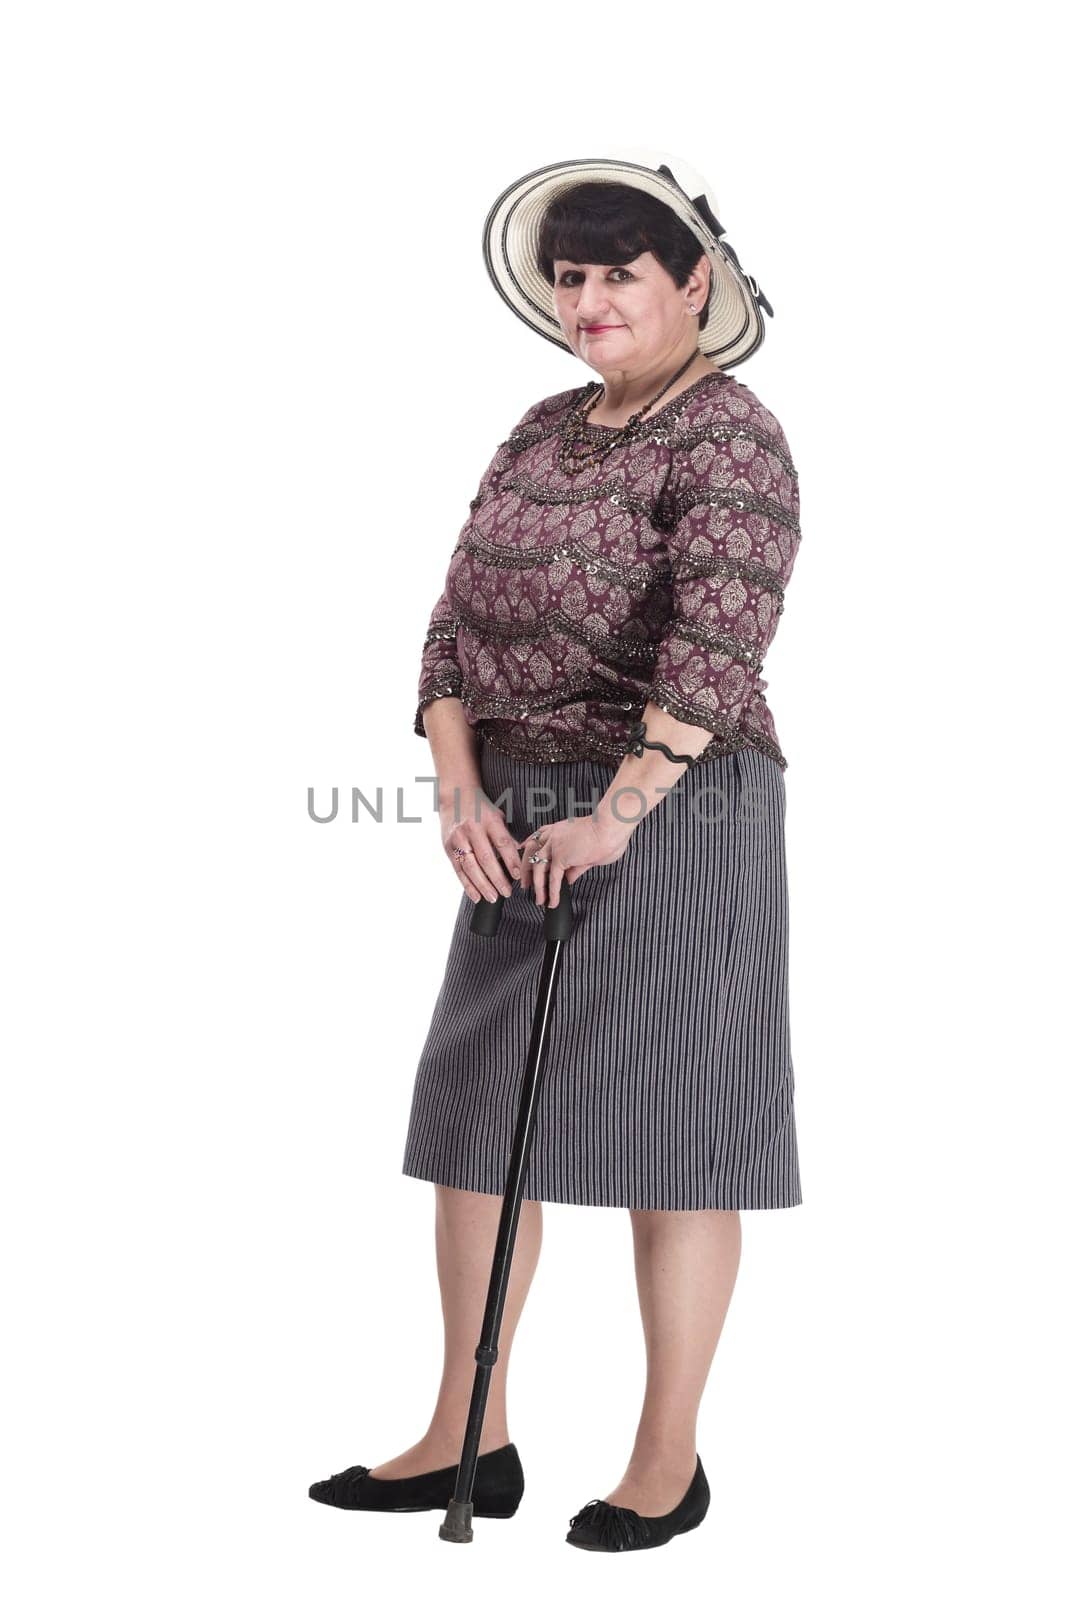 elderly woman with a walking stick in a summer hat. isolated on a white background.